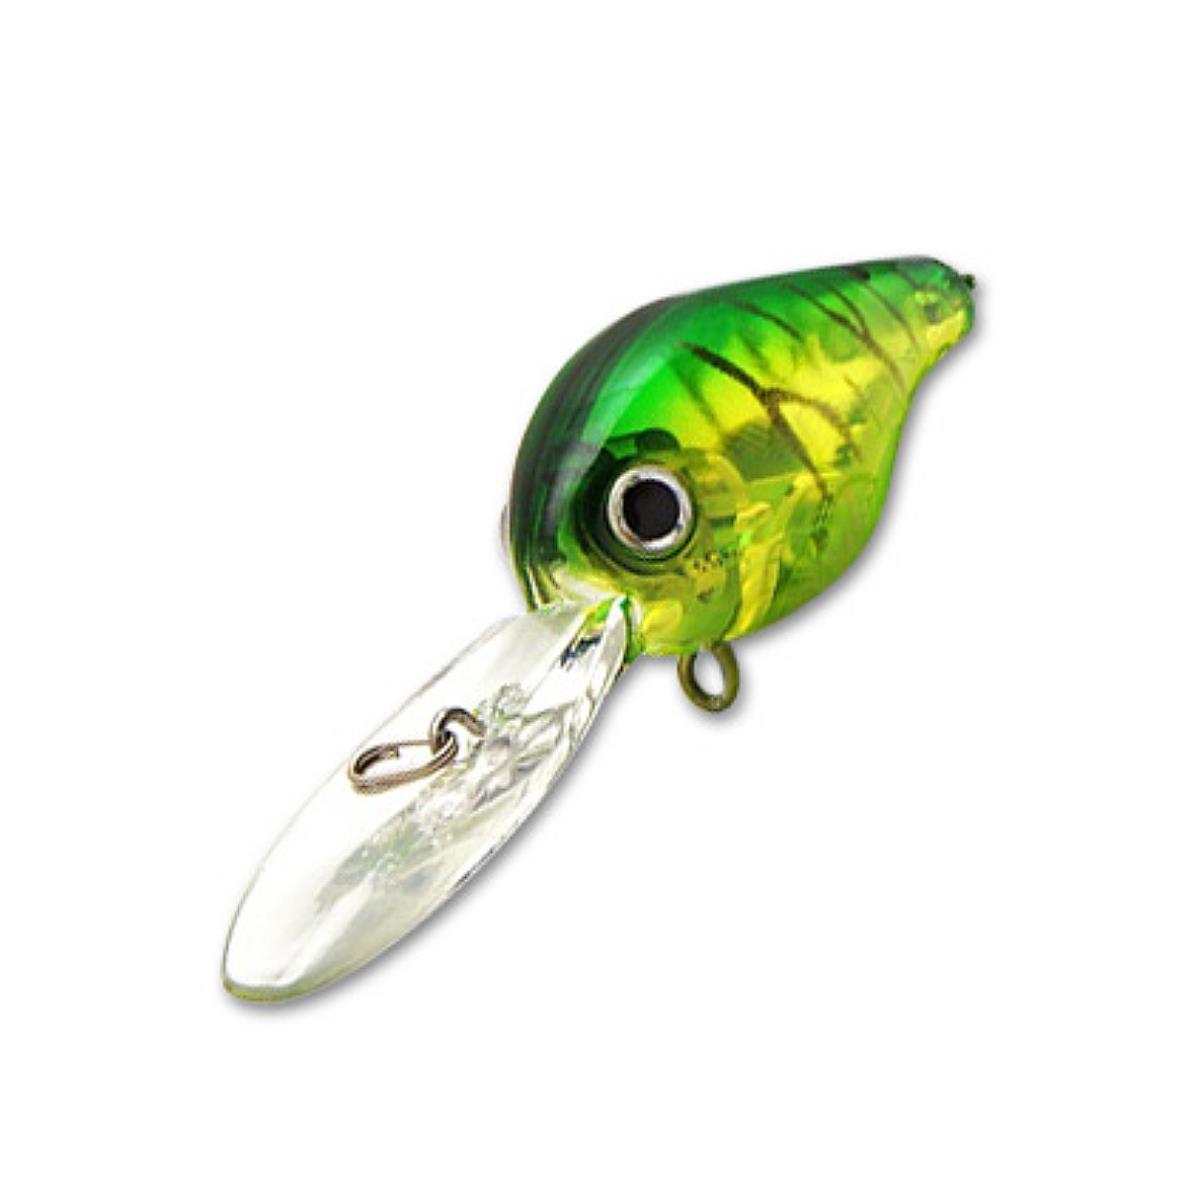 Воблер Clutch XD-5412 Lime Chart Tiger 722 Lucky Craft воблер clutch xd 077 original tennessee shad lucky craft